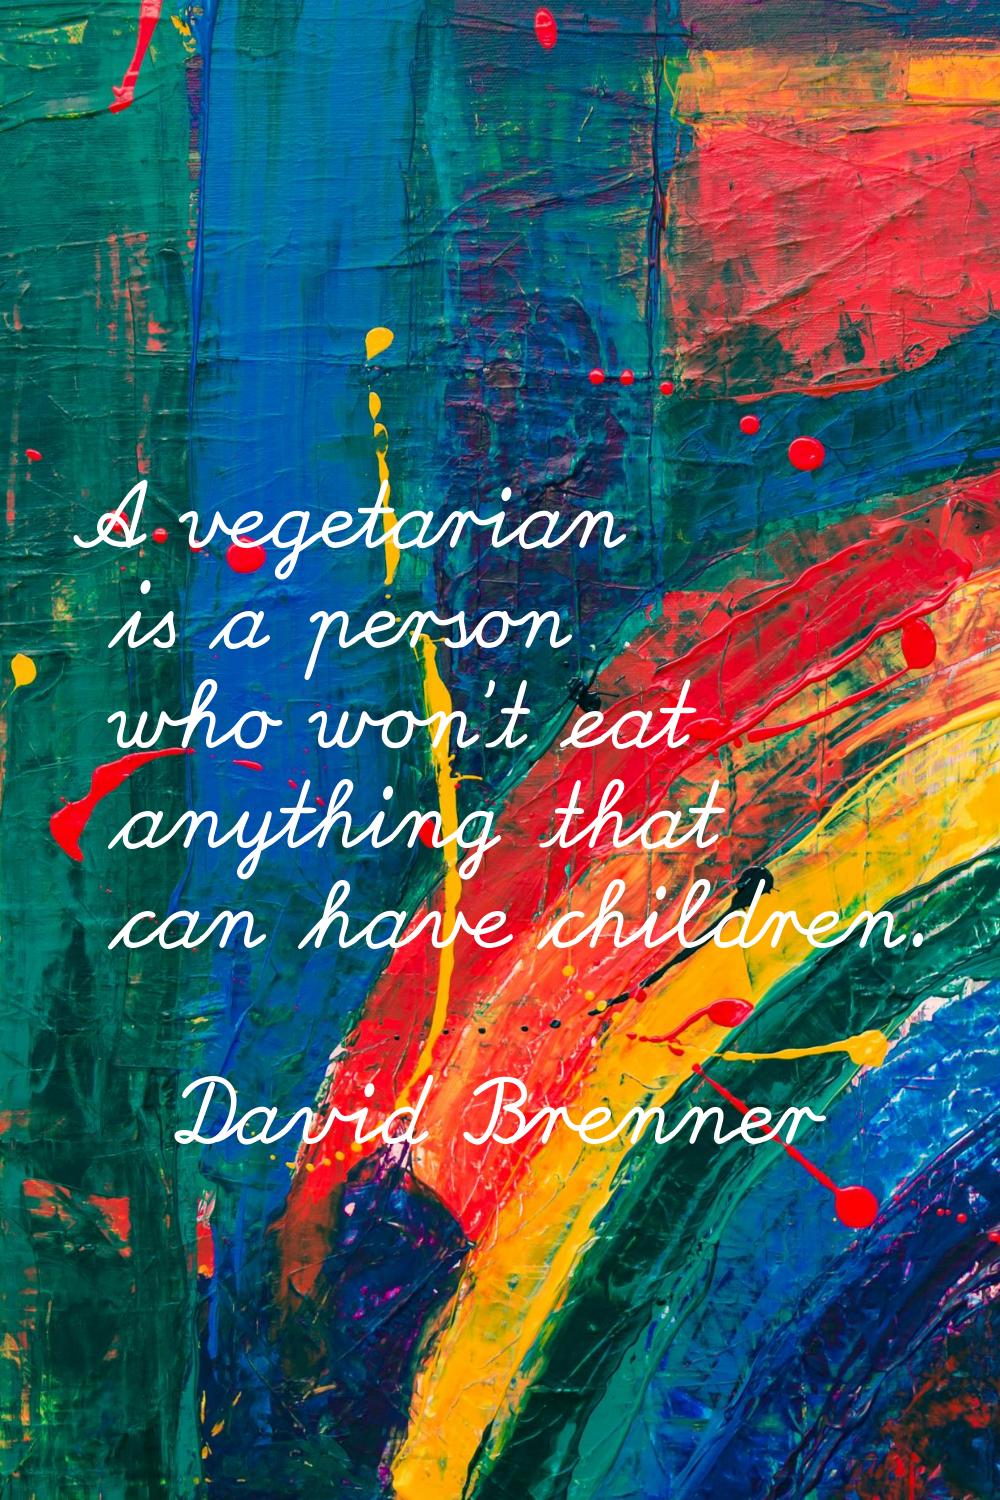 A vegetarian is a person who won't eat anything that can have children.